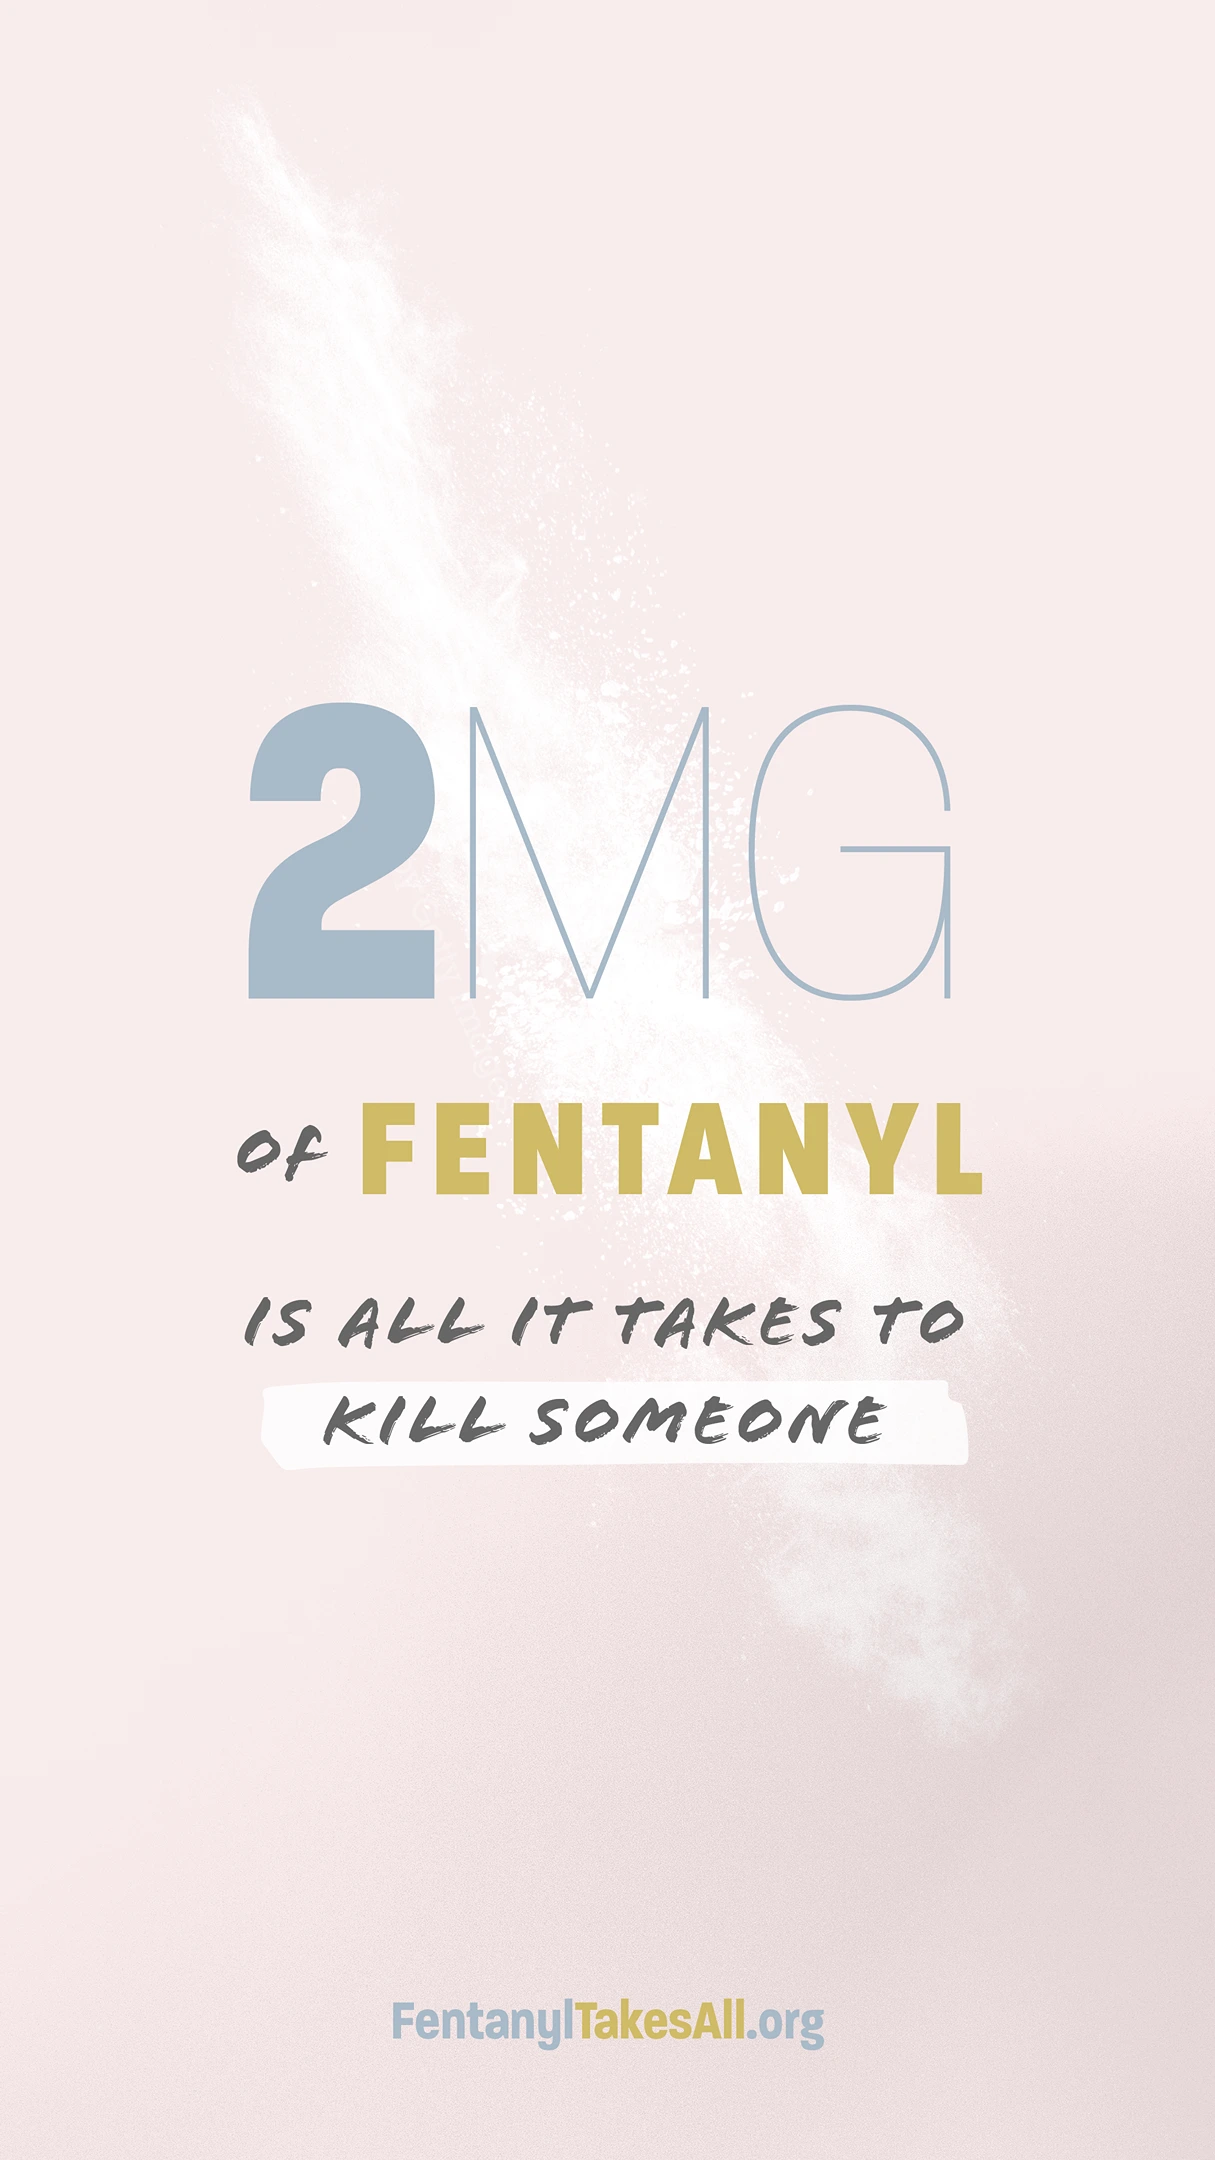 2mg of fentanyl is all it takes to kill someone.